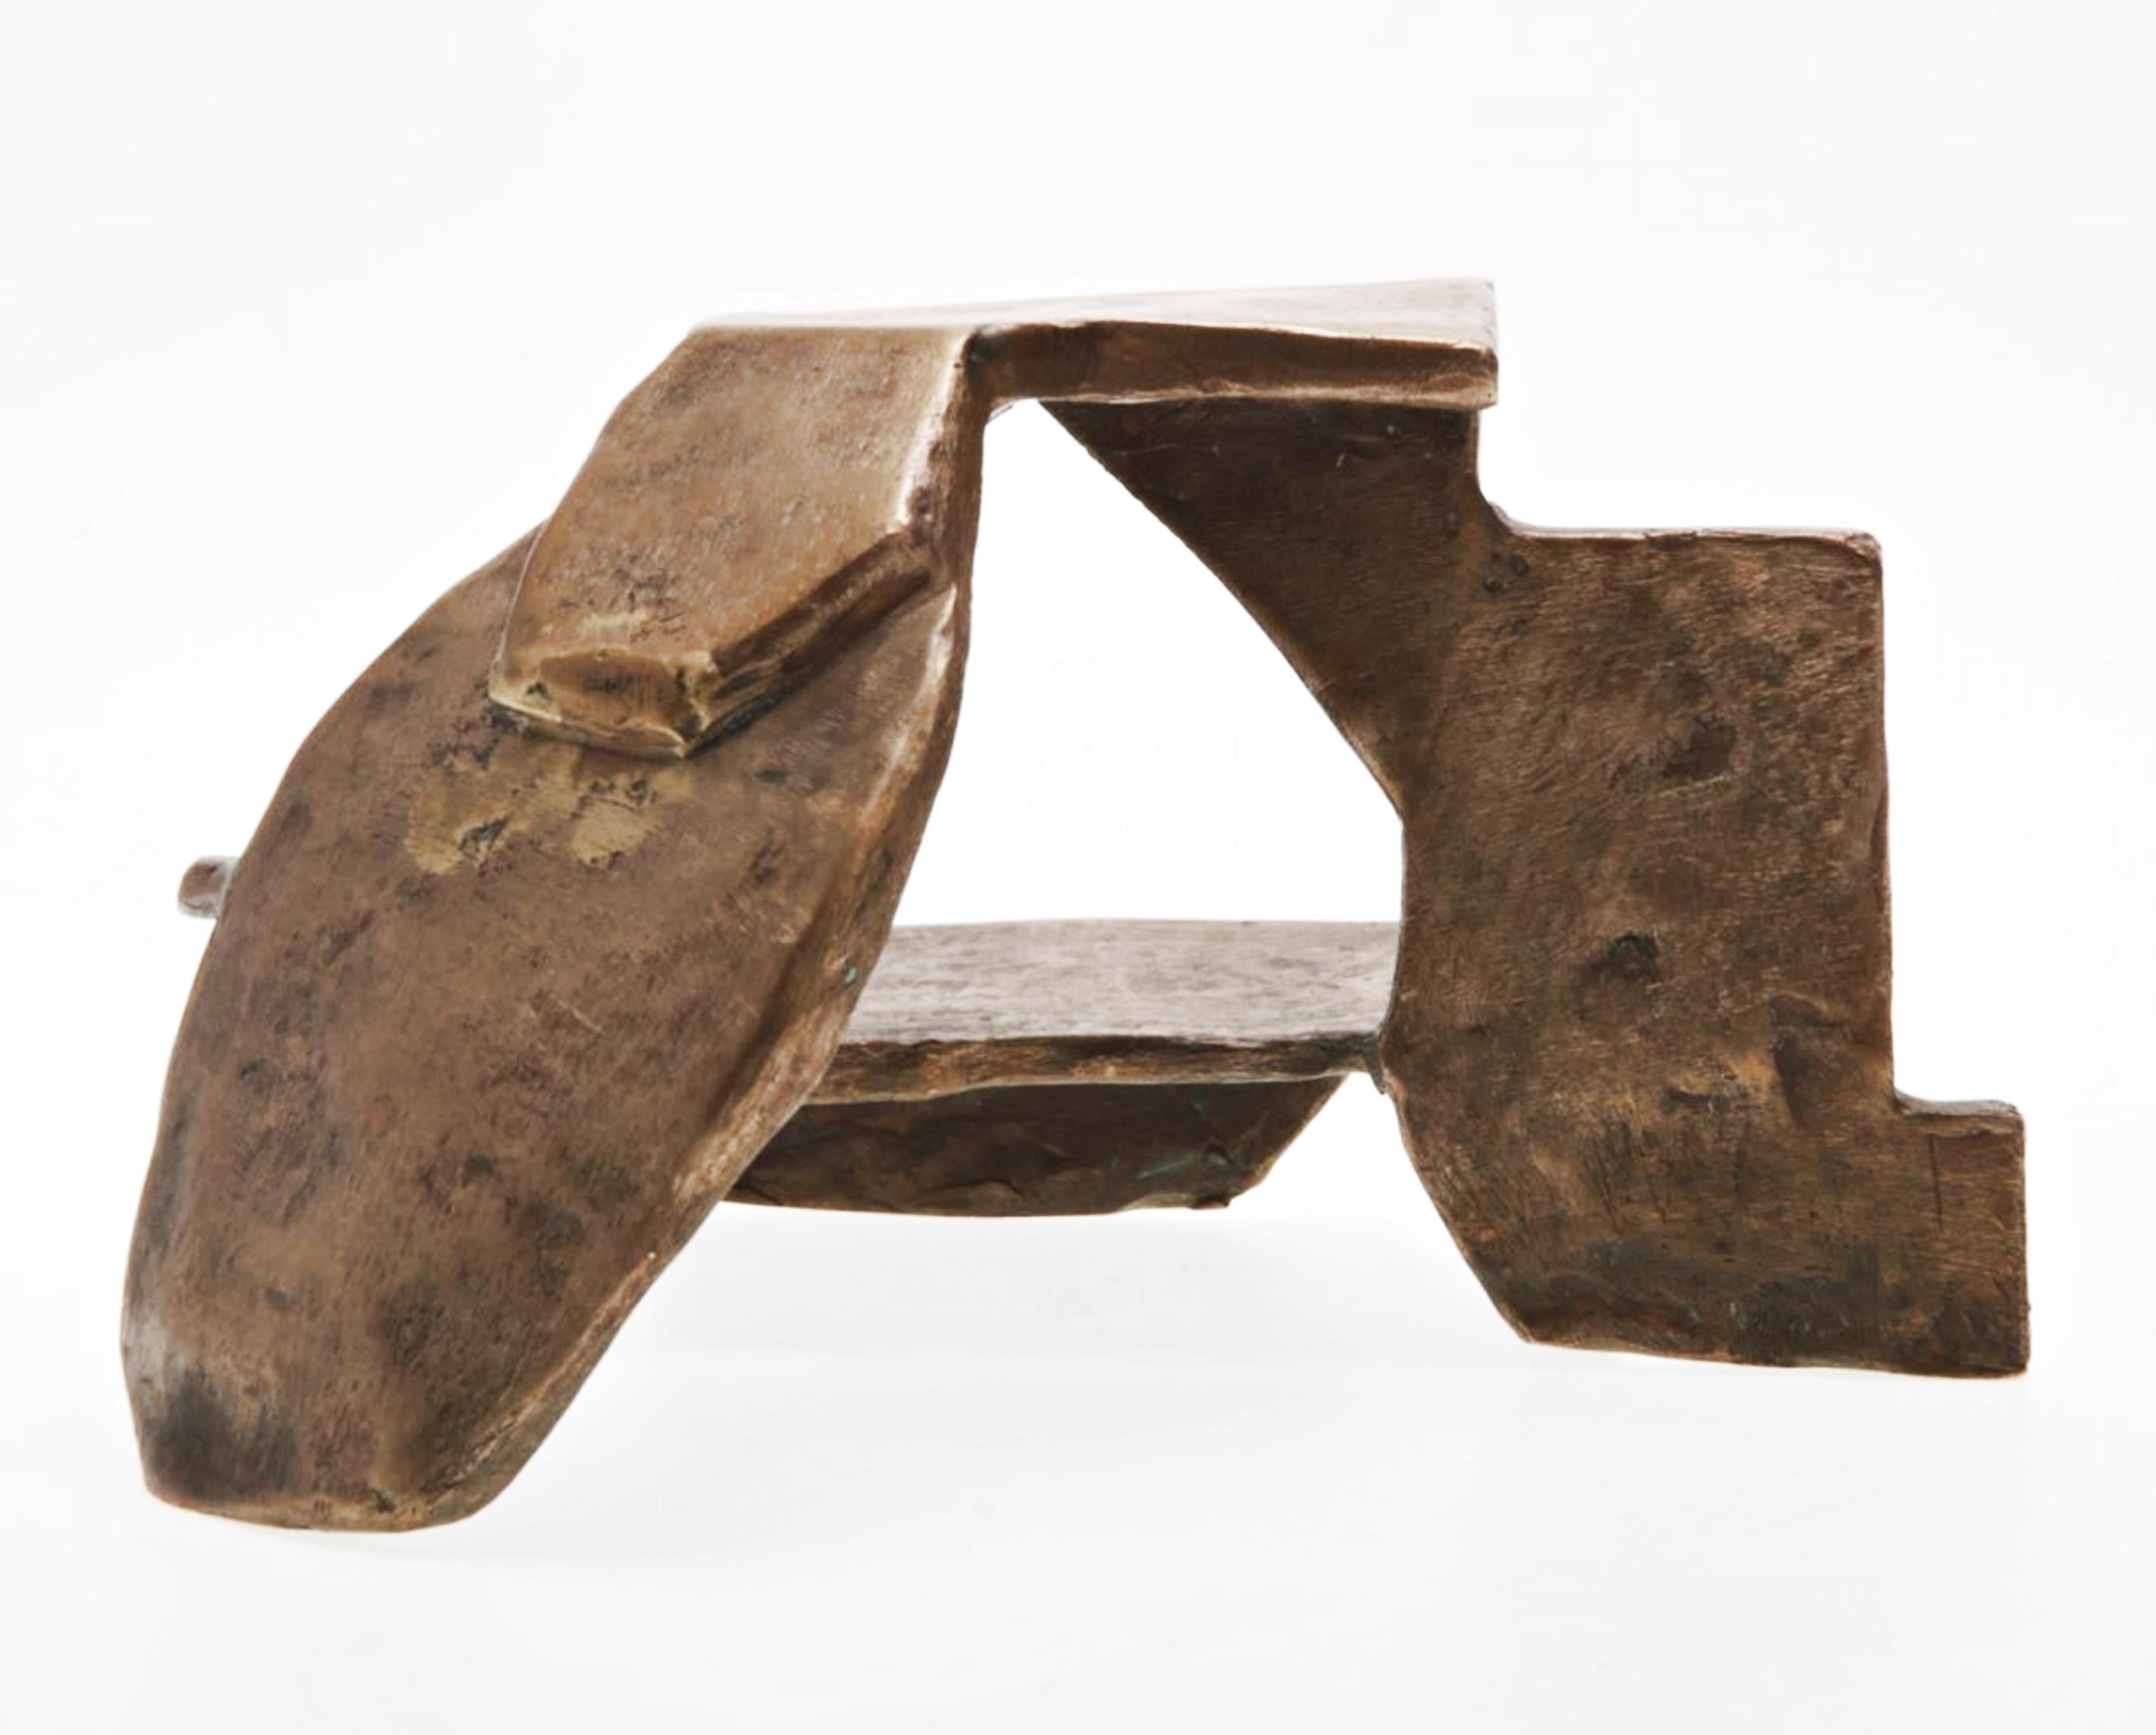 Peter Reginato
Abstract Bronze Sculpture, ca. 1987
Bronze
Signed on the underside
4 × 6 1/2 × 5 1/2 inches
This bronze sculpture is by the American abstract sculptor Peter Reginato. This artwork's interplay of positive and negative space creates a